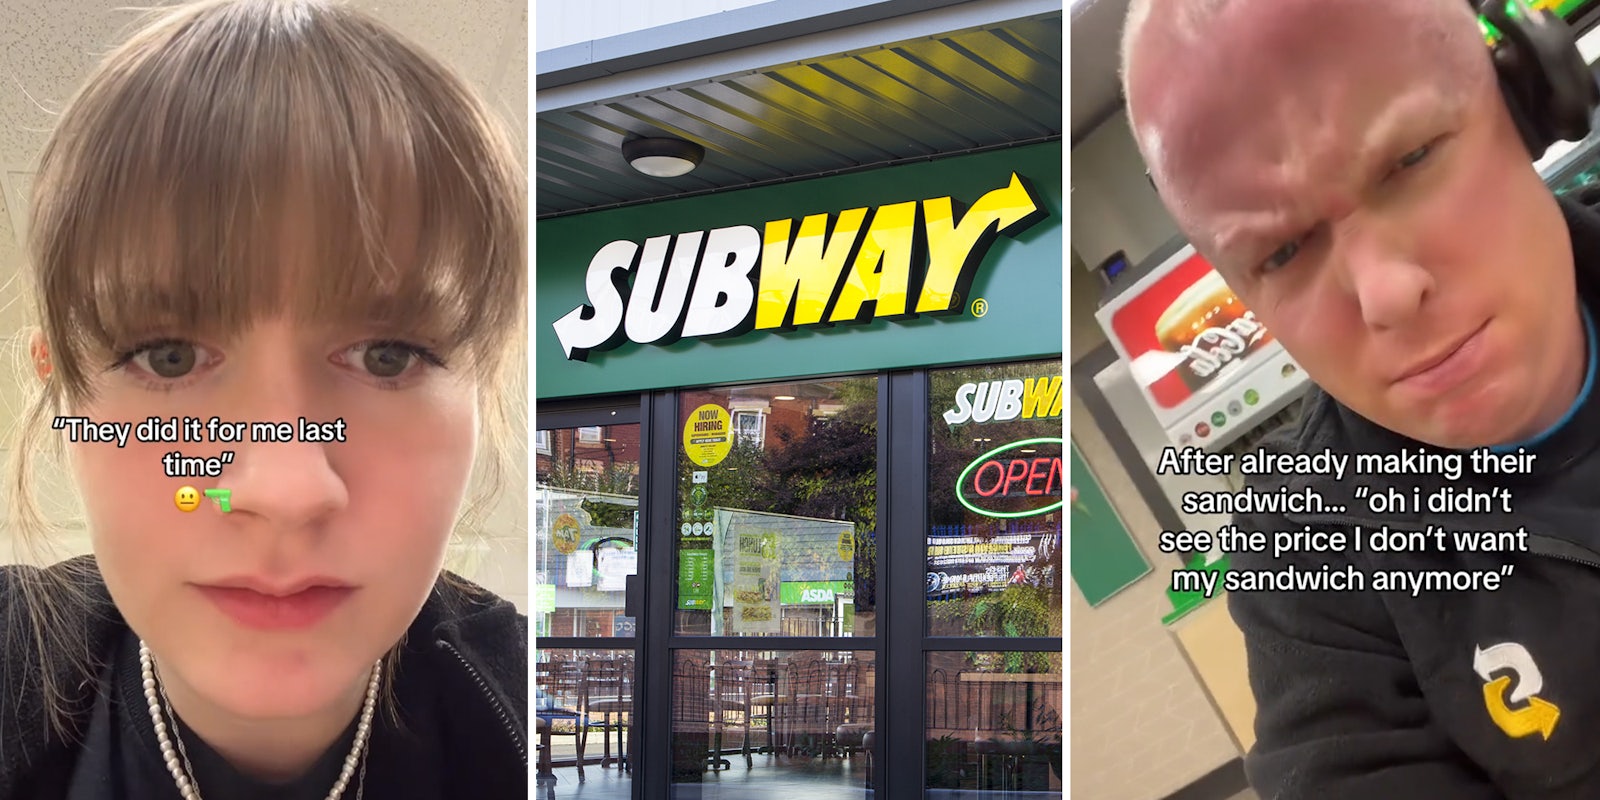 Subway worker says customer had them make a sandwich, then walked out after seeing cost